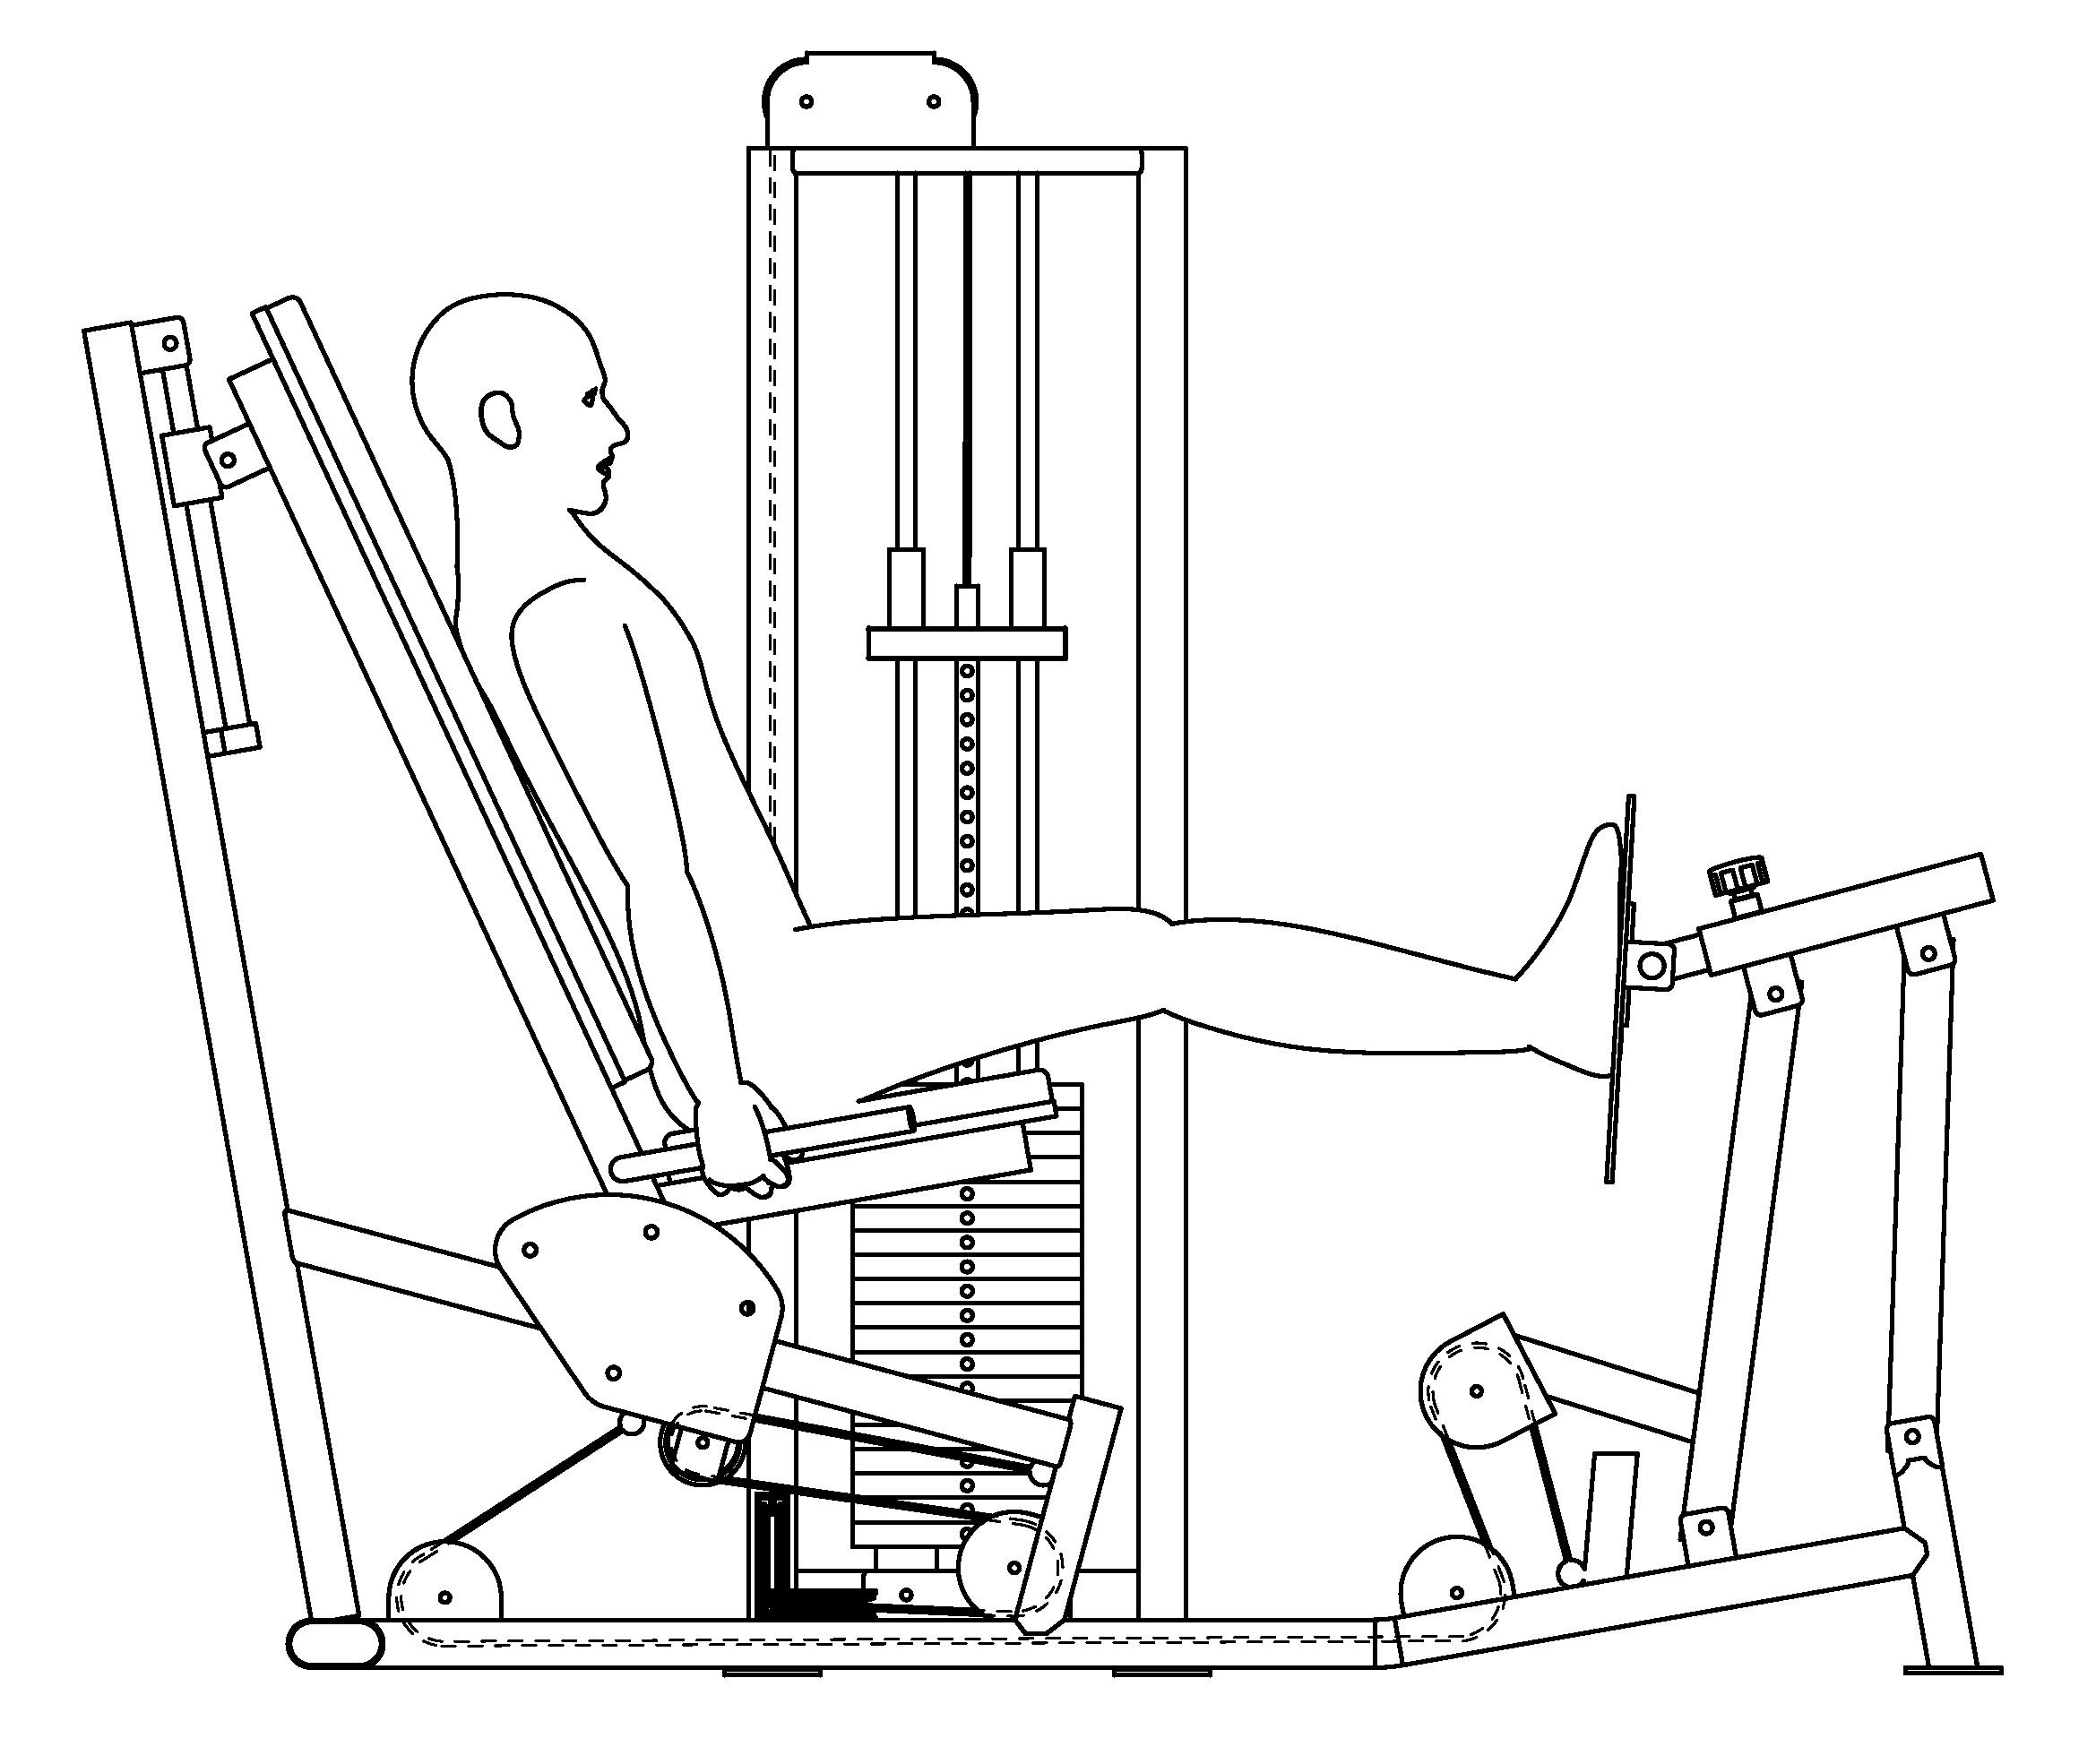 Functional training equipment with multiple movement planes used for lower body exercises